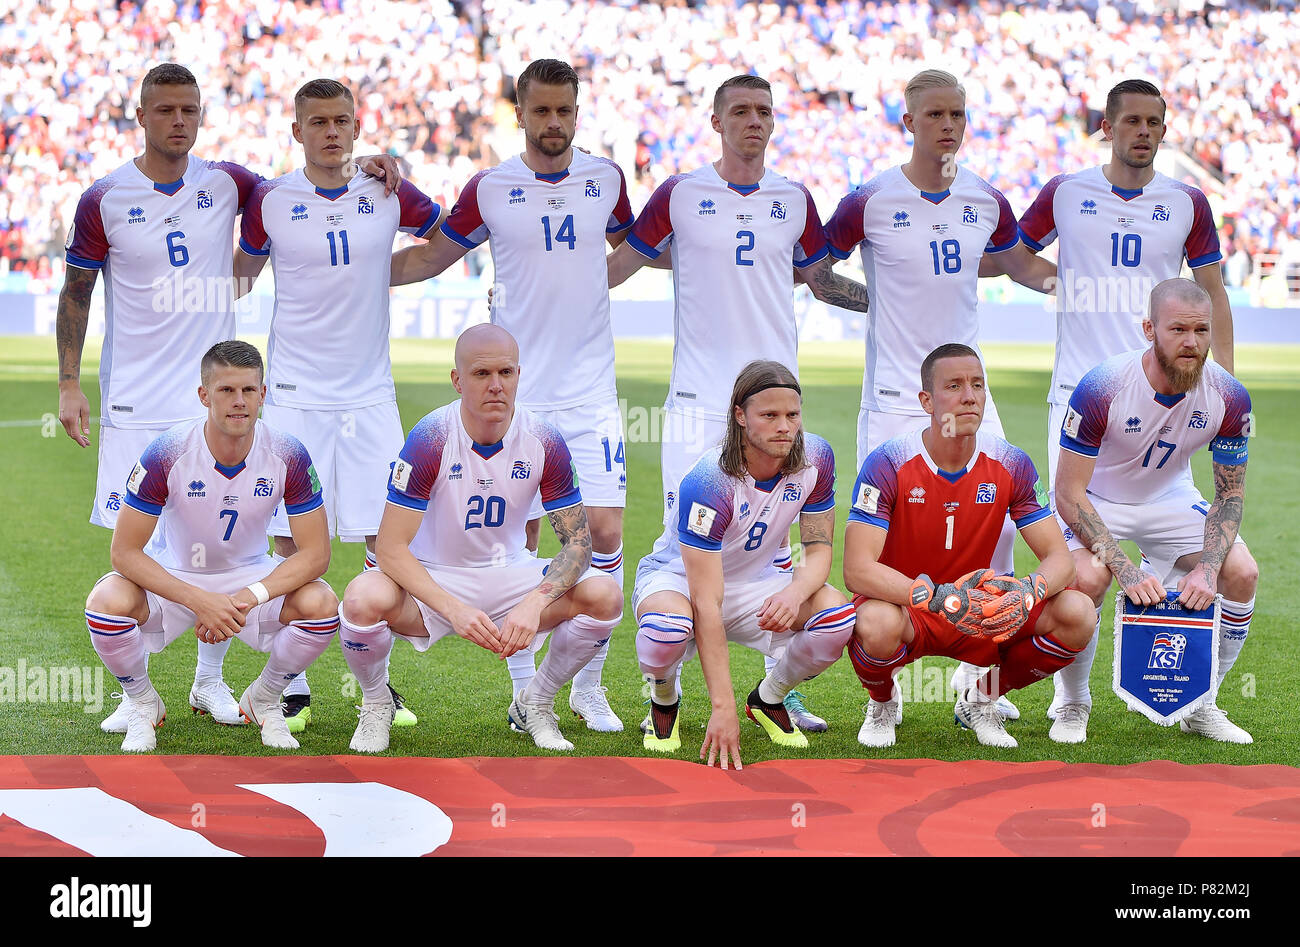 MOSCOW, RUSSIA - JUNE 16: Team photo Ragnar Sigurdsson of Iceland, Alfred Finnbogason of Iceland, Kari Arnason of Iceland, Birkir Saevarsson of Iceland, Hordur Magnusson of Iceland, Gylfi Sigurdsson of Iceland, Johann Gudmundsson of Iceland, Emil Hallfredsson of Iceland, Birkir Bjarnason of Iceland, Hannes Halldorsson of Iceland, Aron Gunnarsson of Iceland before the 2018 FIFA World Cup Russia group D match between Argentina and Iceland at Spartak Stadium on June 16, 2018 in Moscow, Russia. (Photo by Lukasz Laskowski/PressFocus/MB Media) Stock Photo